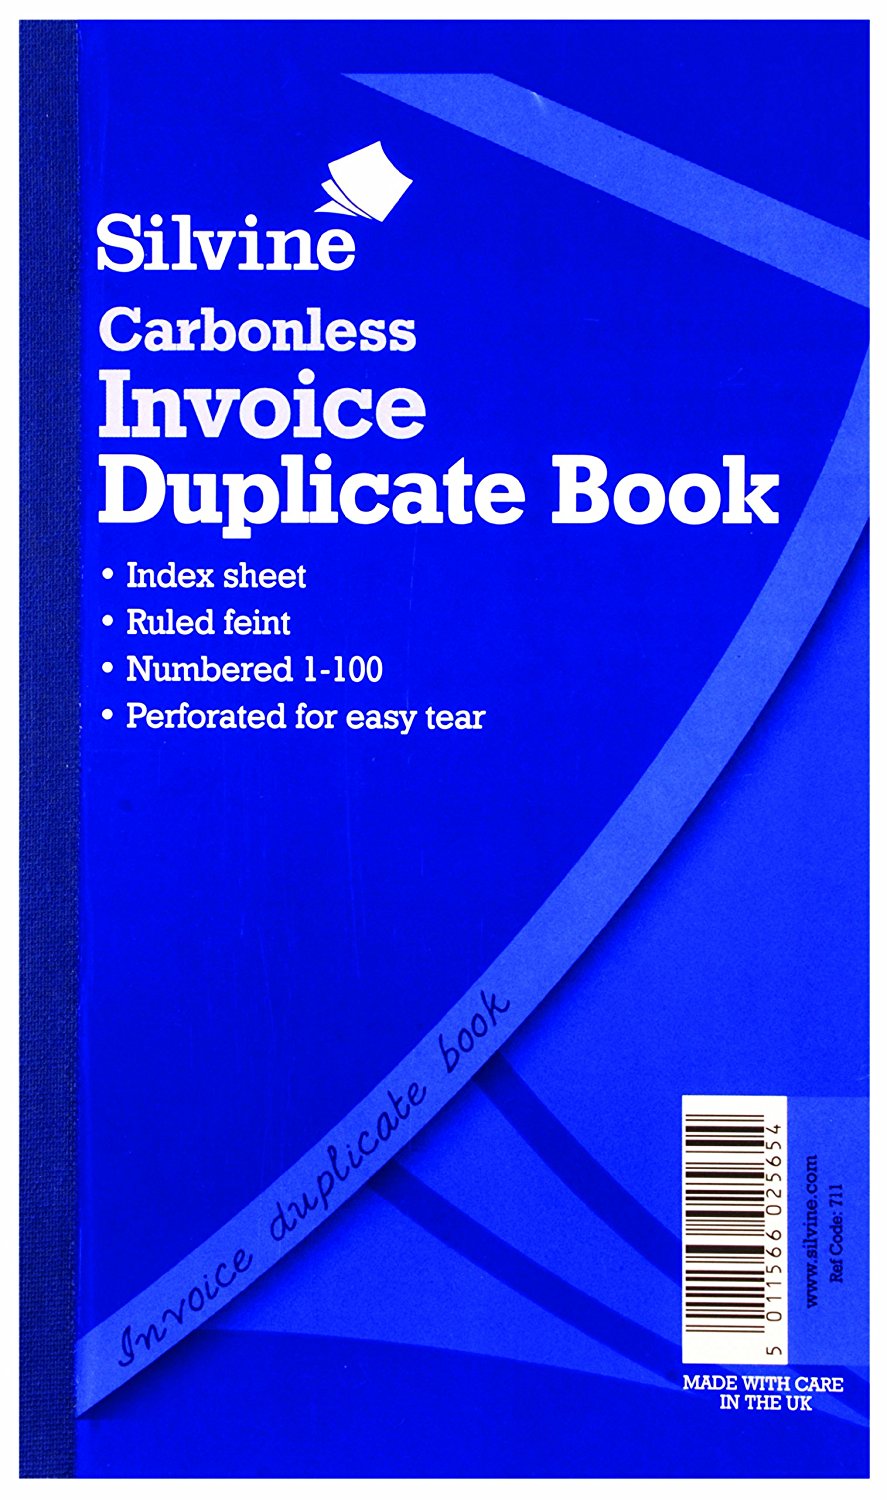 Silvine 210x127mm Duplicate Invoice Book Carbonless Ruled 1-100 Taped Cloth Binding 100 Sets (Pack 6)